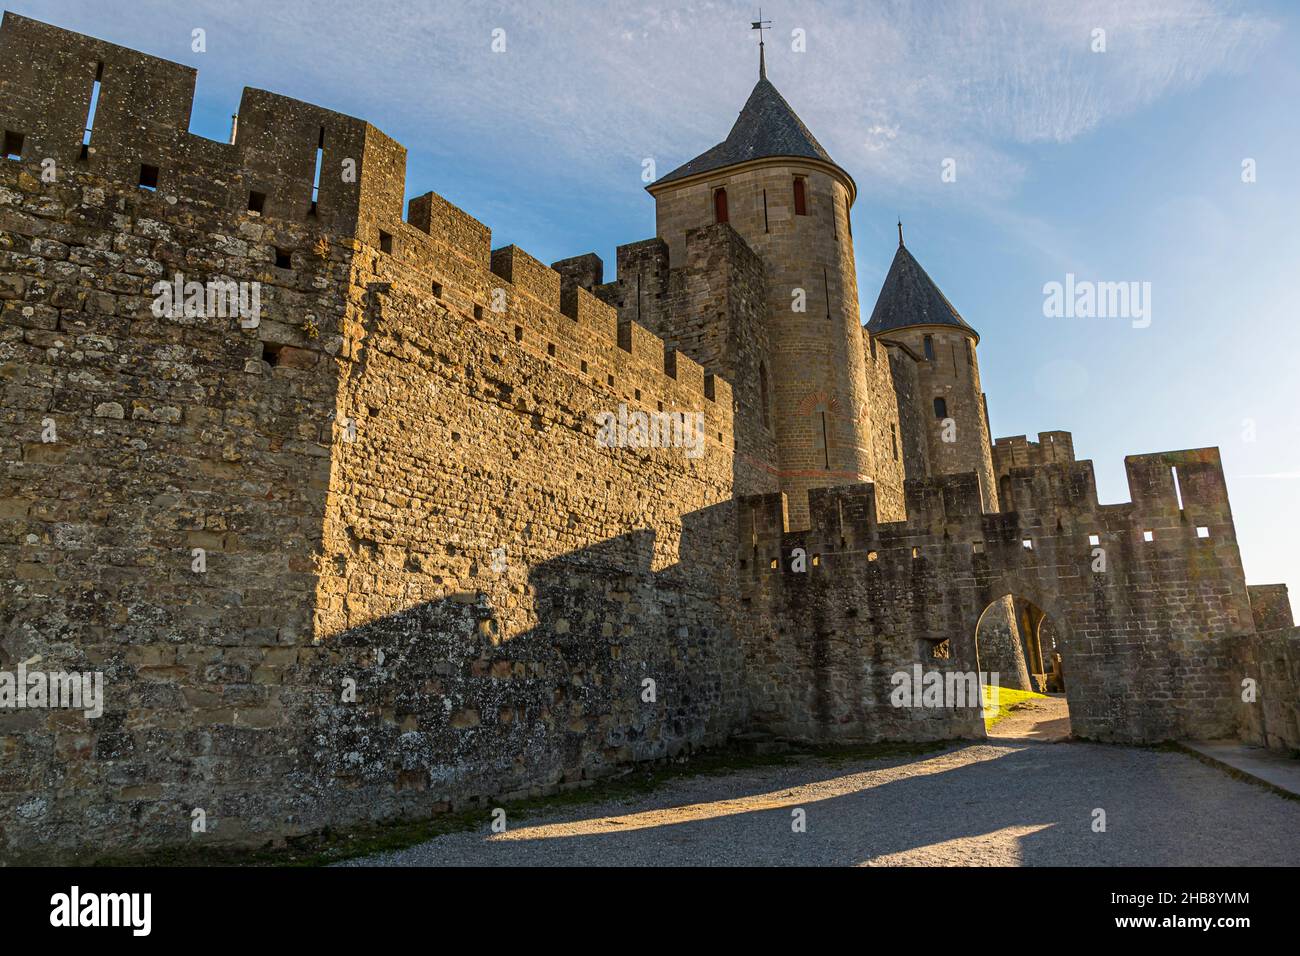 Medieval fortress located on a hill of the old town, called Cité of Carcassonne. Carcassonne, France Stock Photo